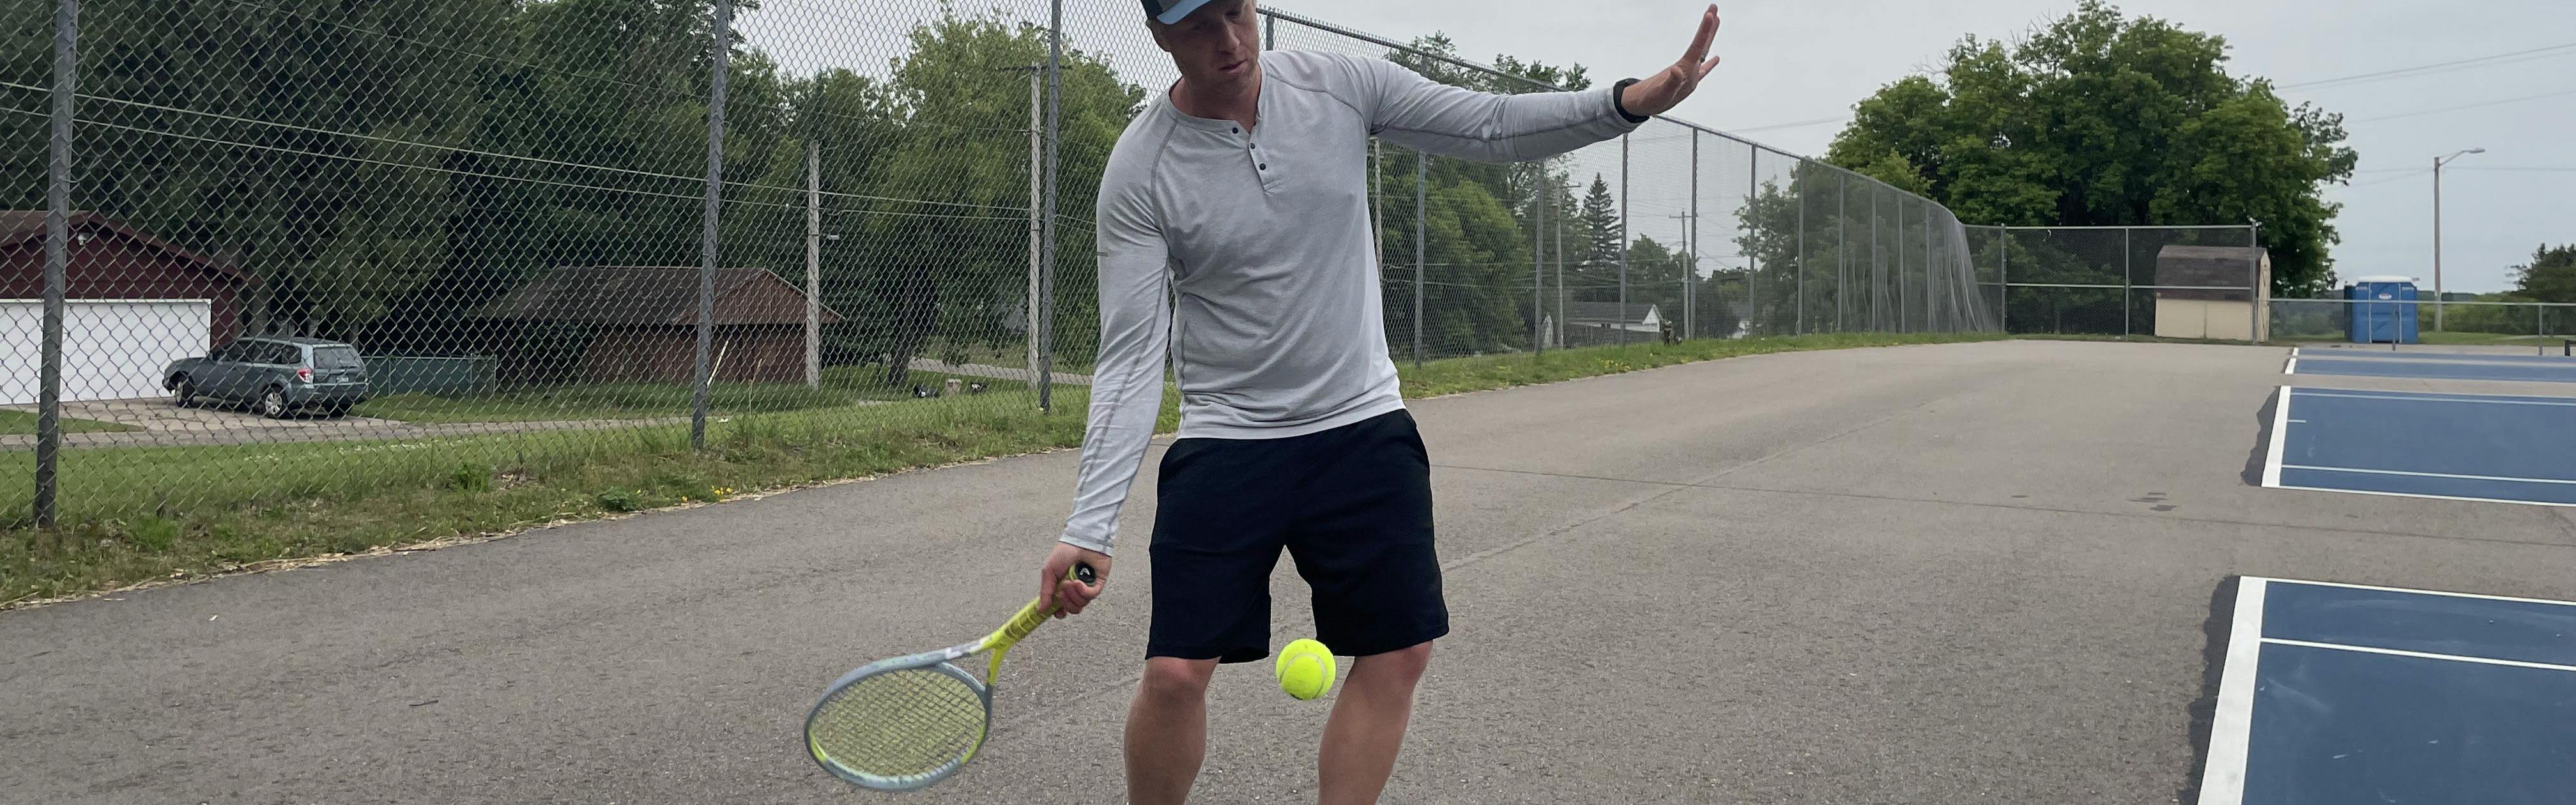 A tennis player takes a swing at a tennis ball with the Head Graphene 360+ Extreme MP Racquet.